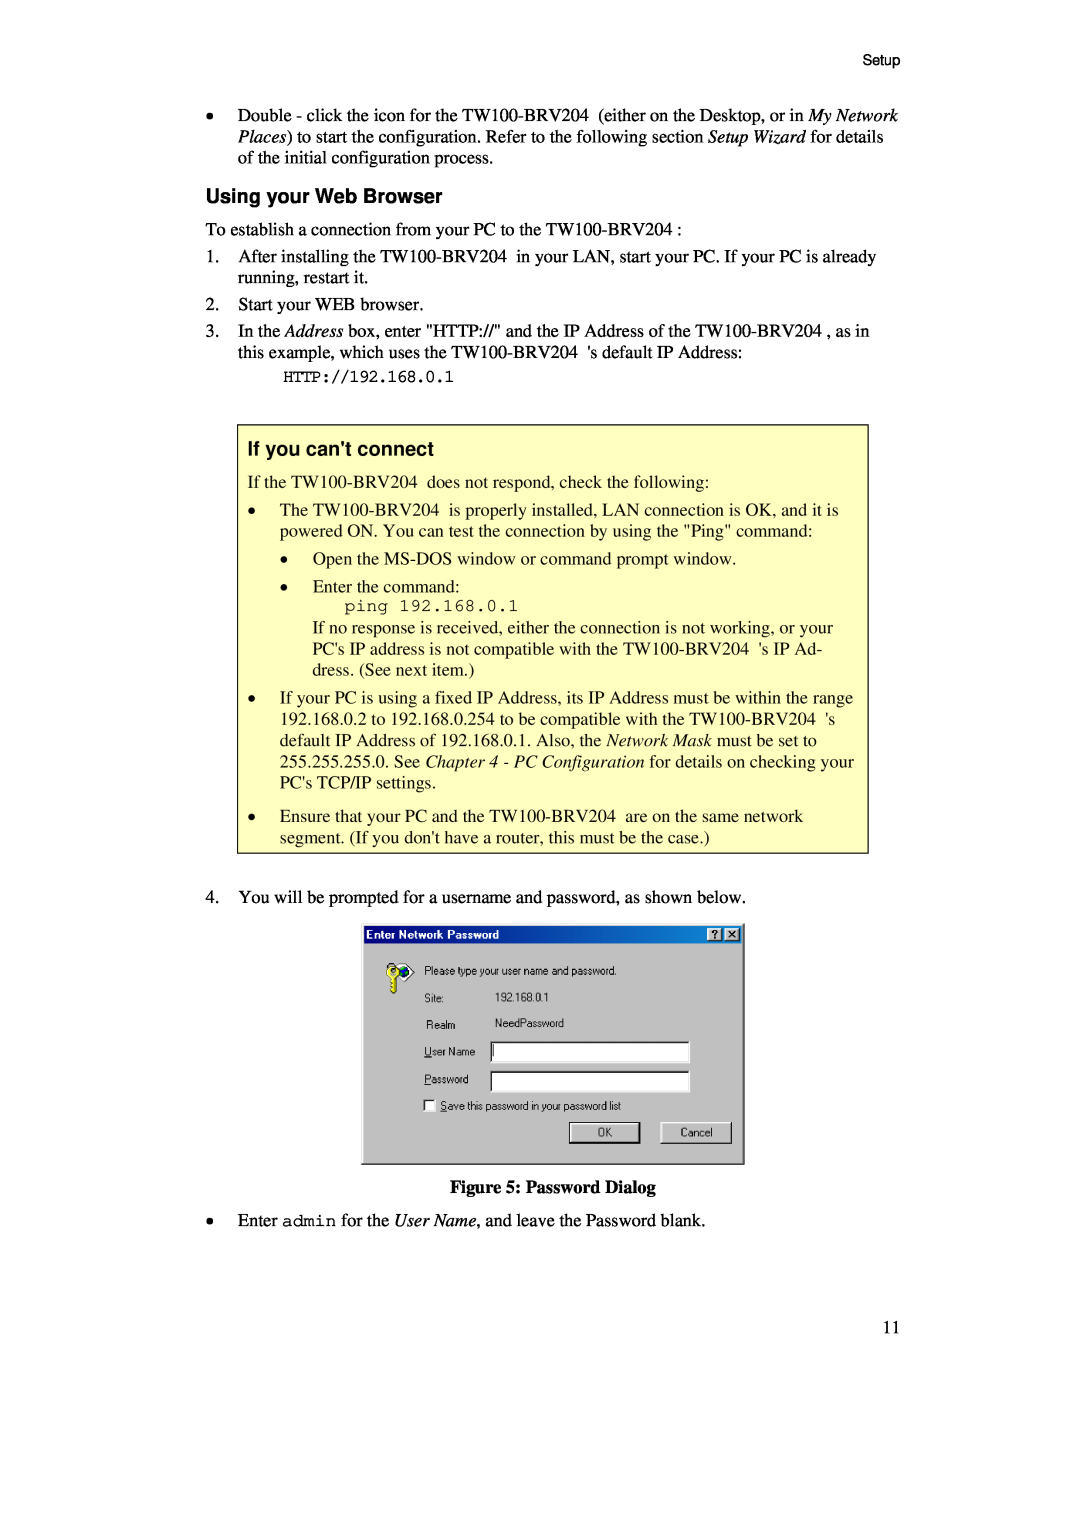 TRENDnet BRV204 manual Using your Web Browser, If you cant connect, Password Dialog 